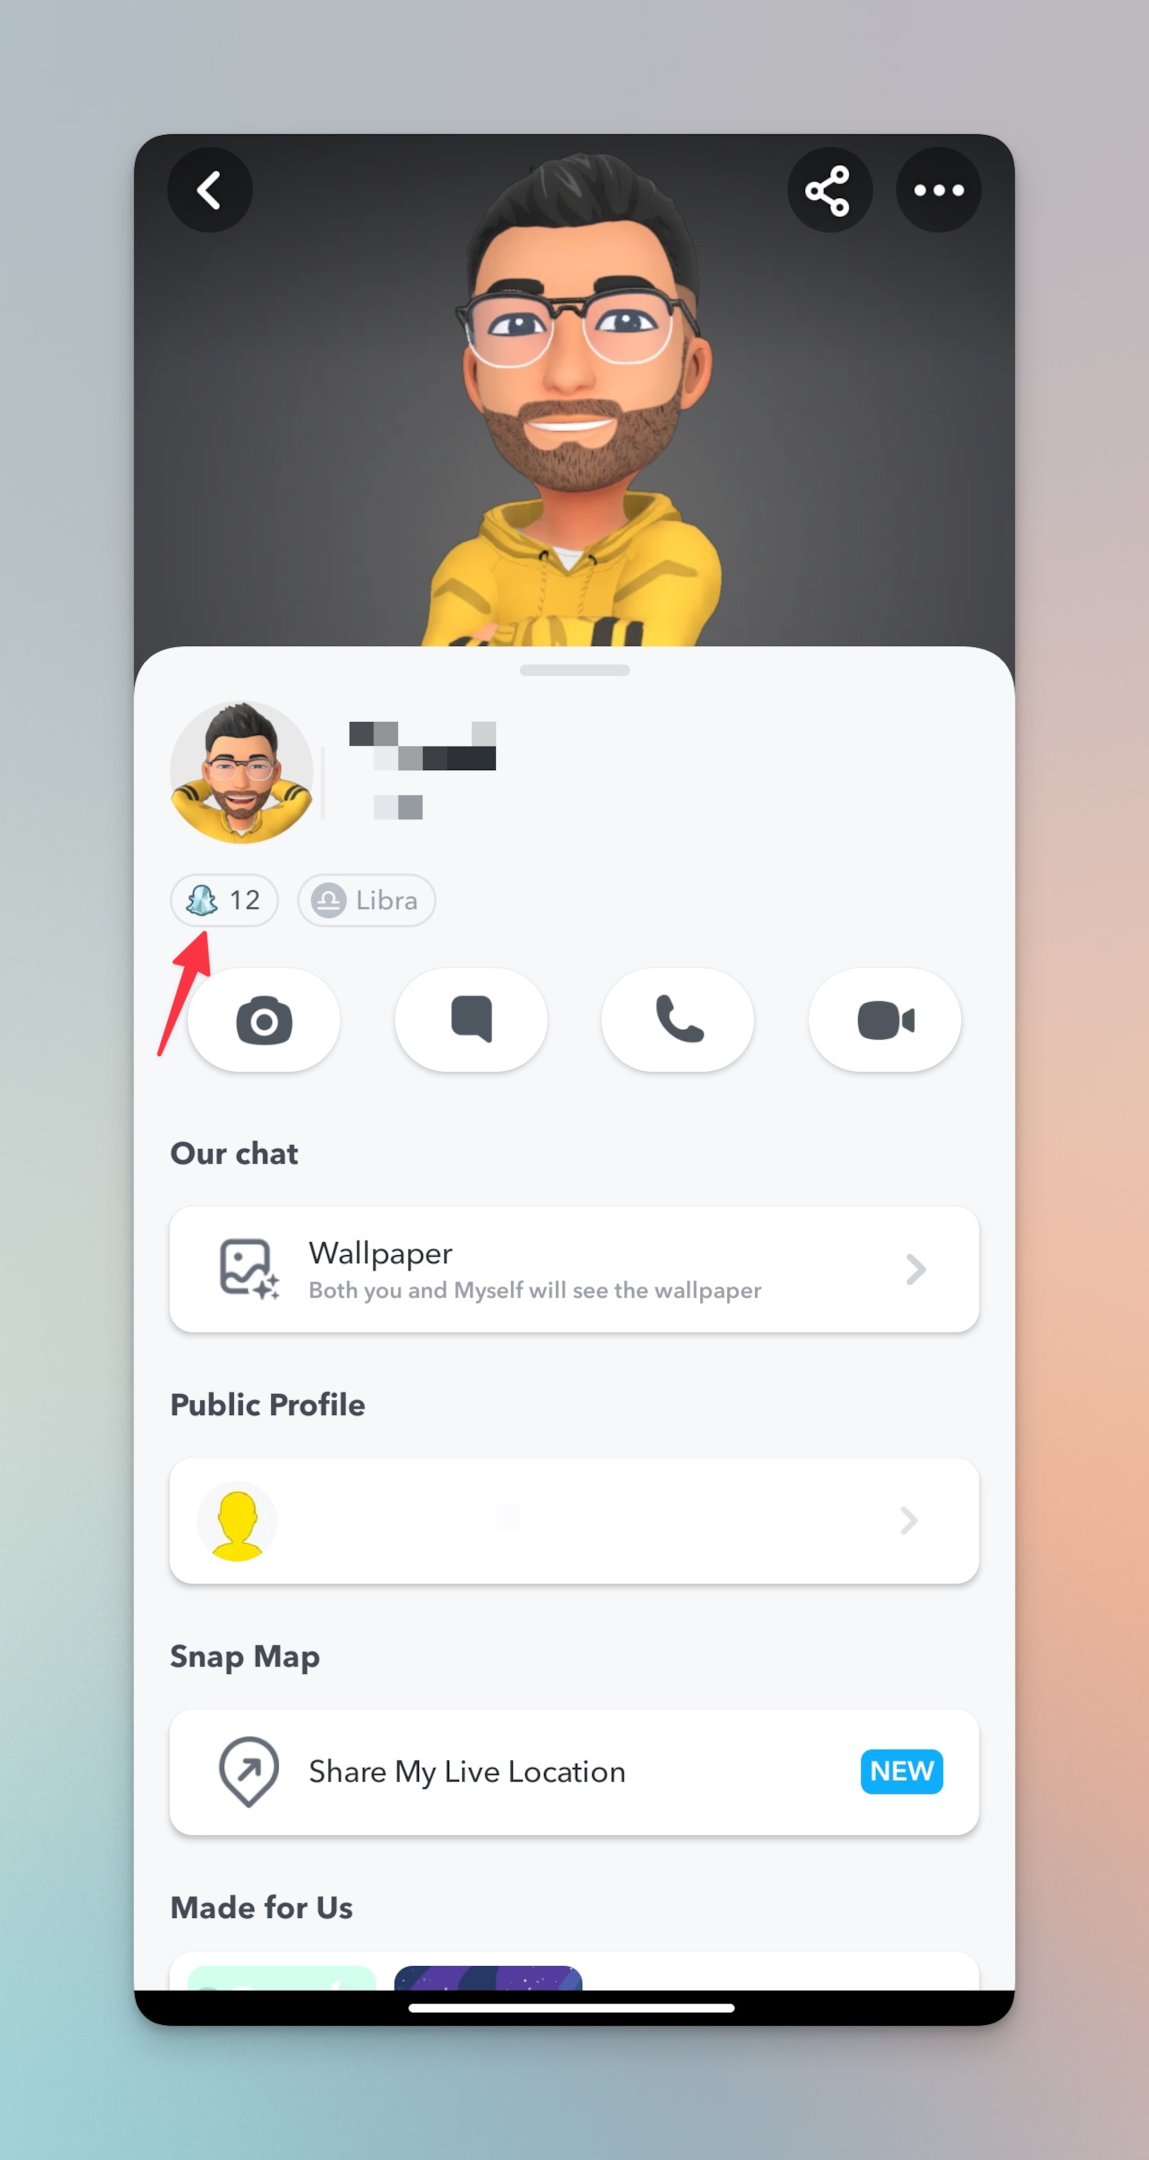 Remote.tools points to friend's snap score. All users who are your friends can see you Snap score and you can see theirs